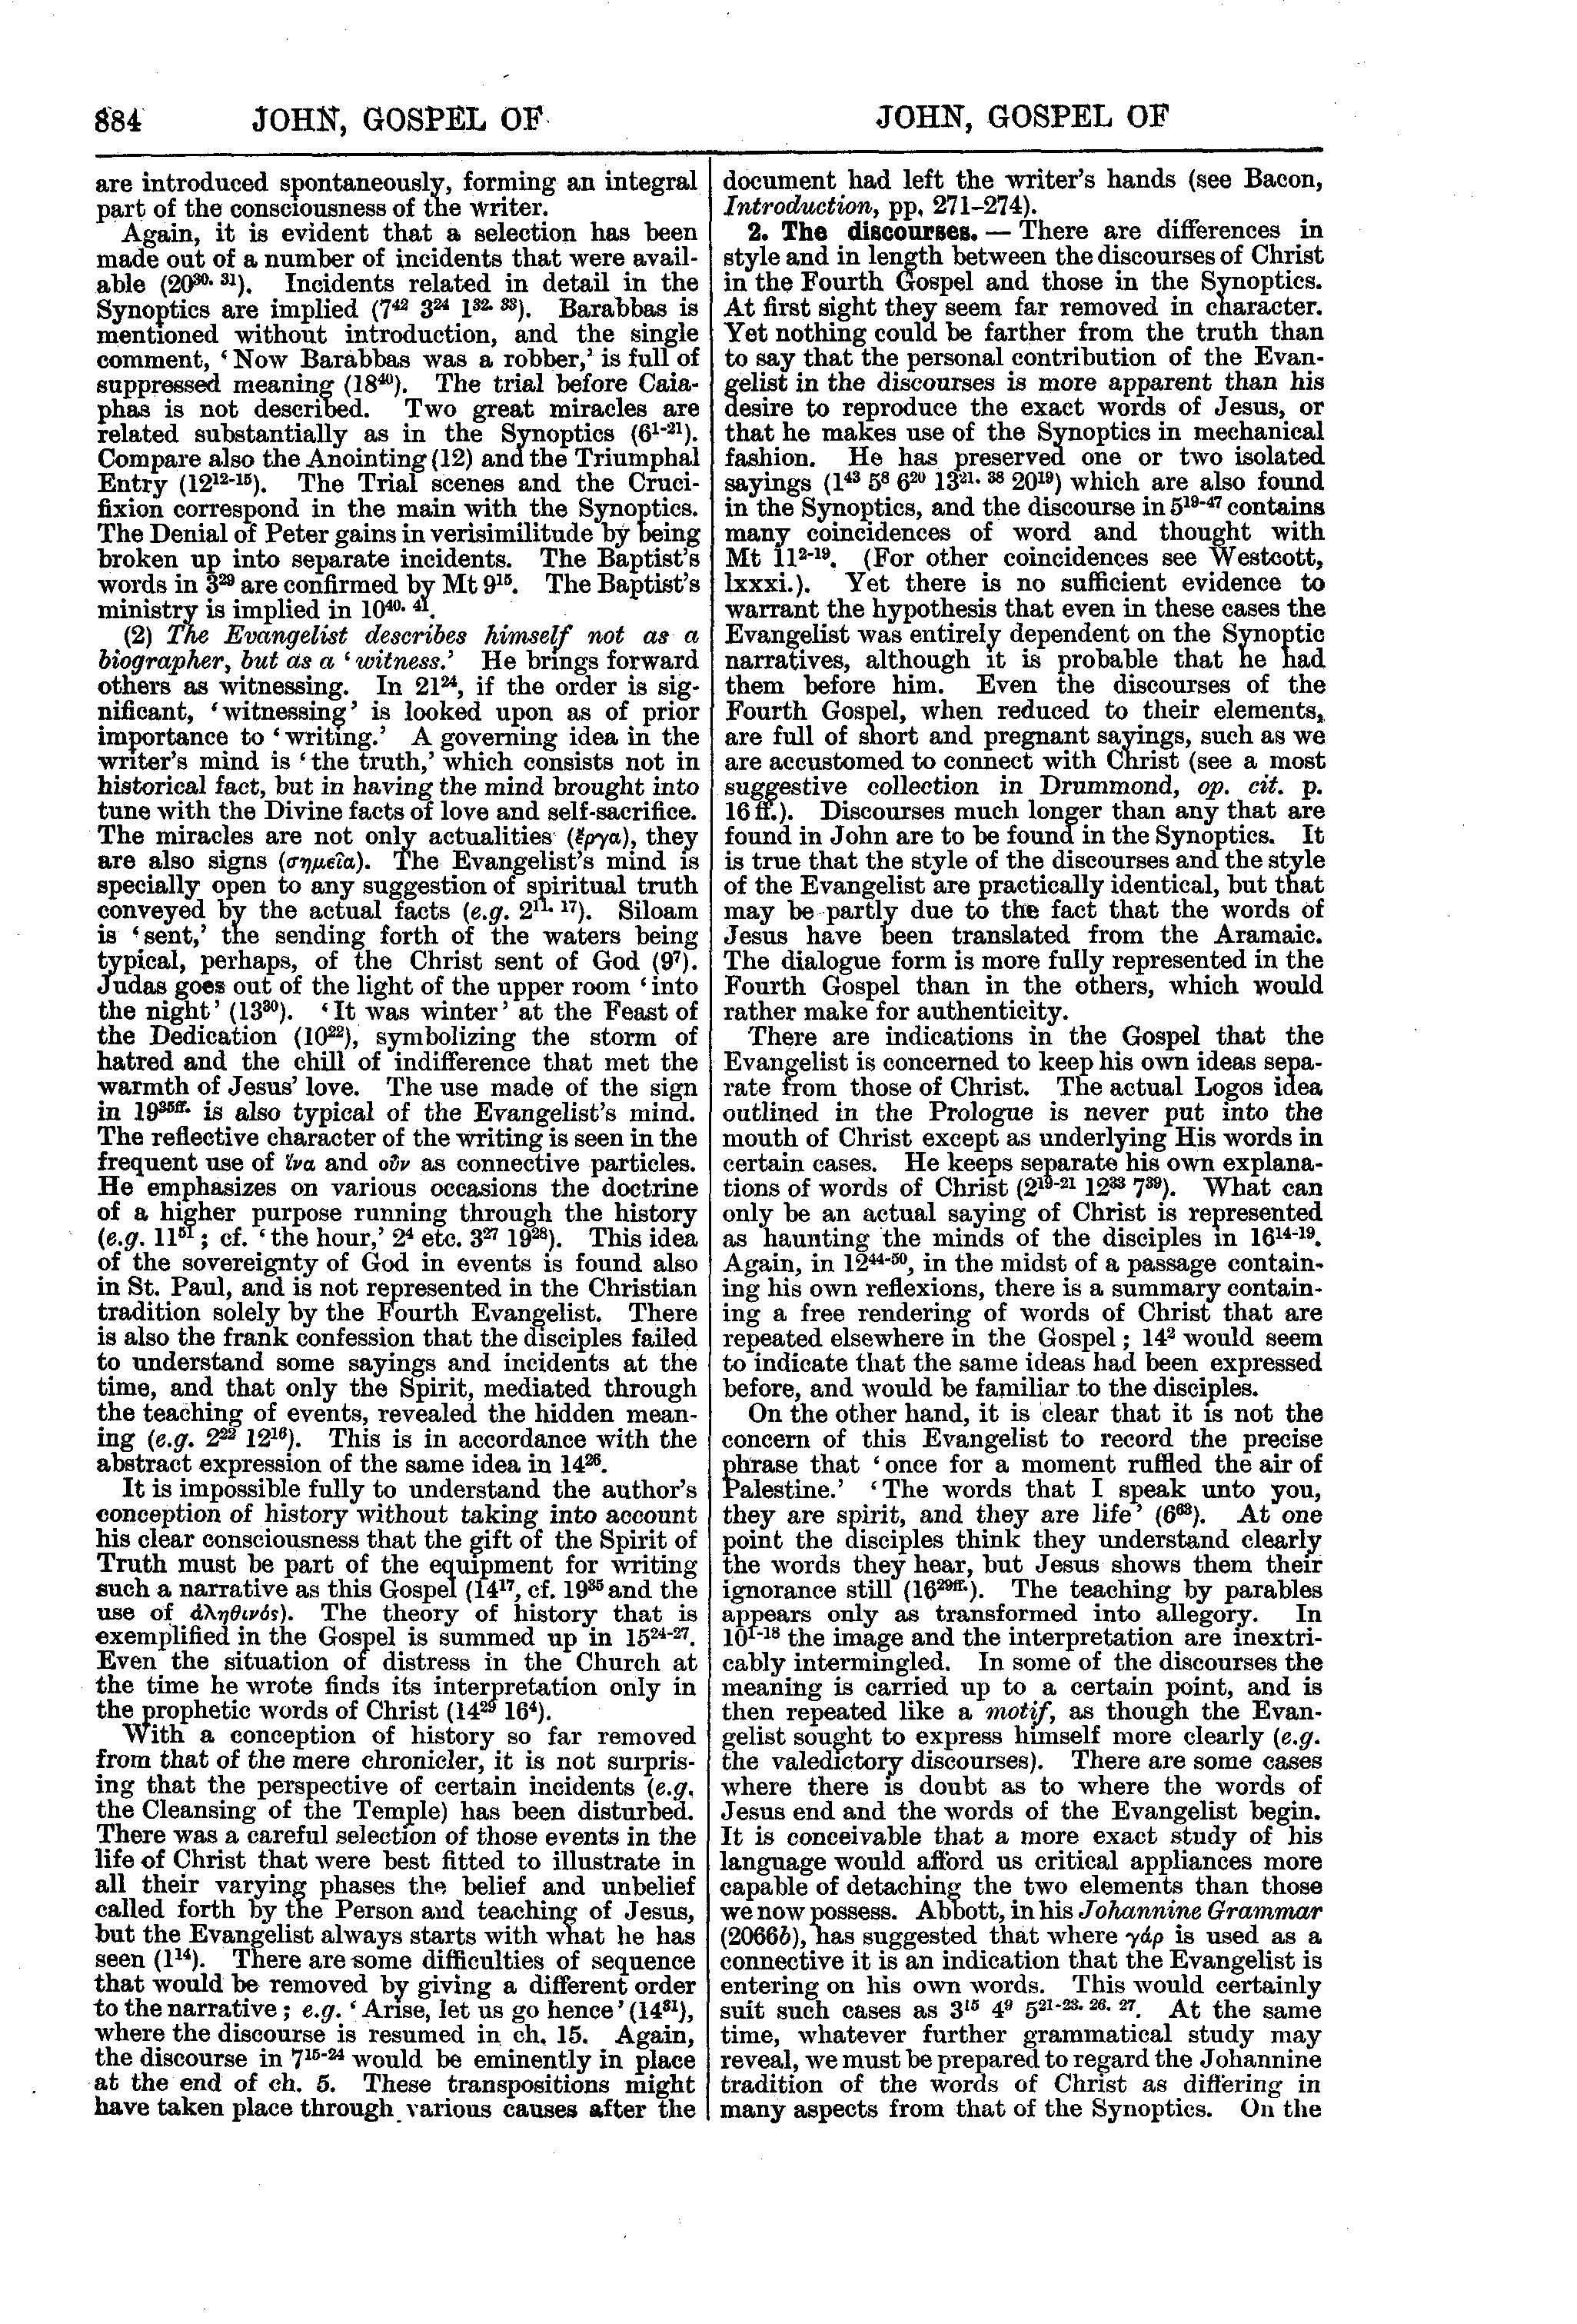 Image of page 884